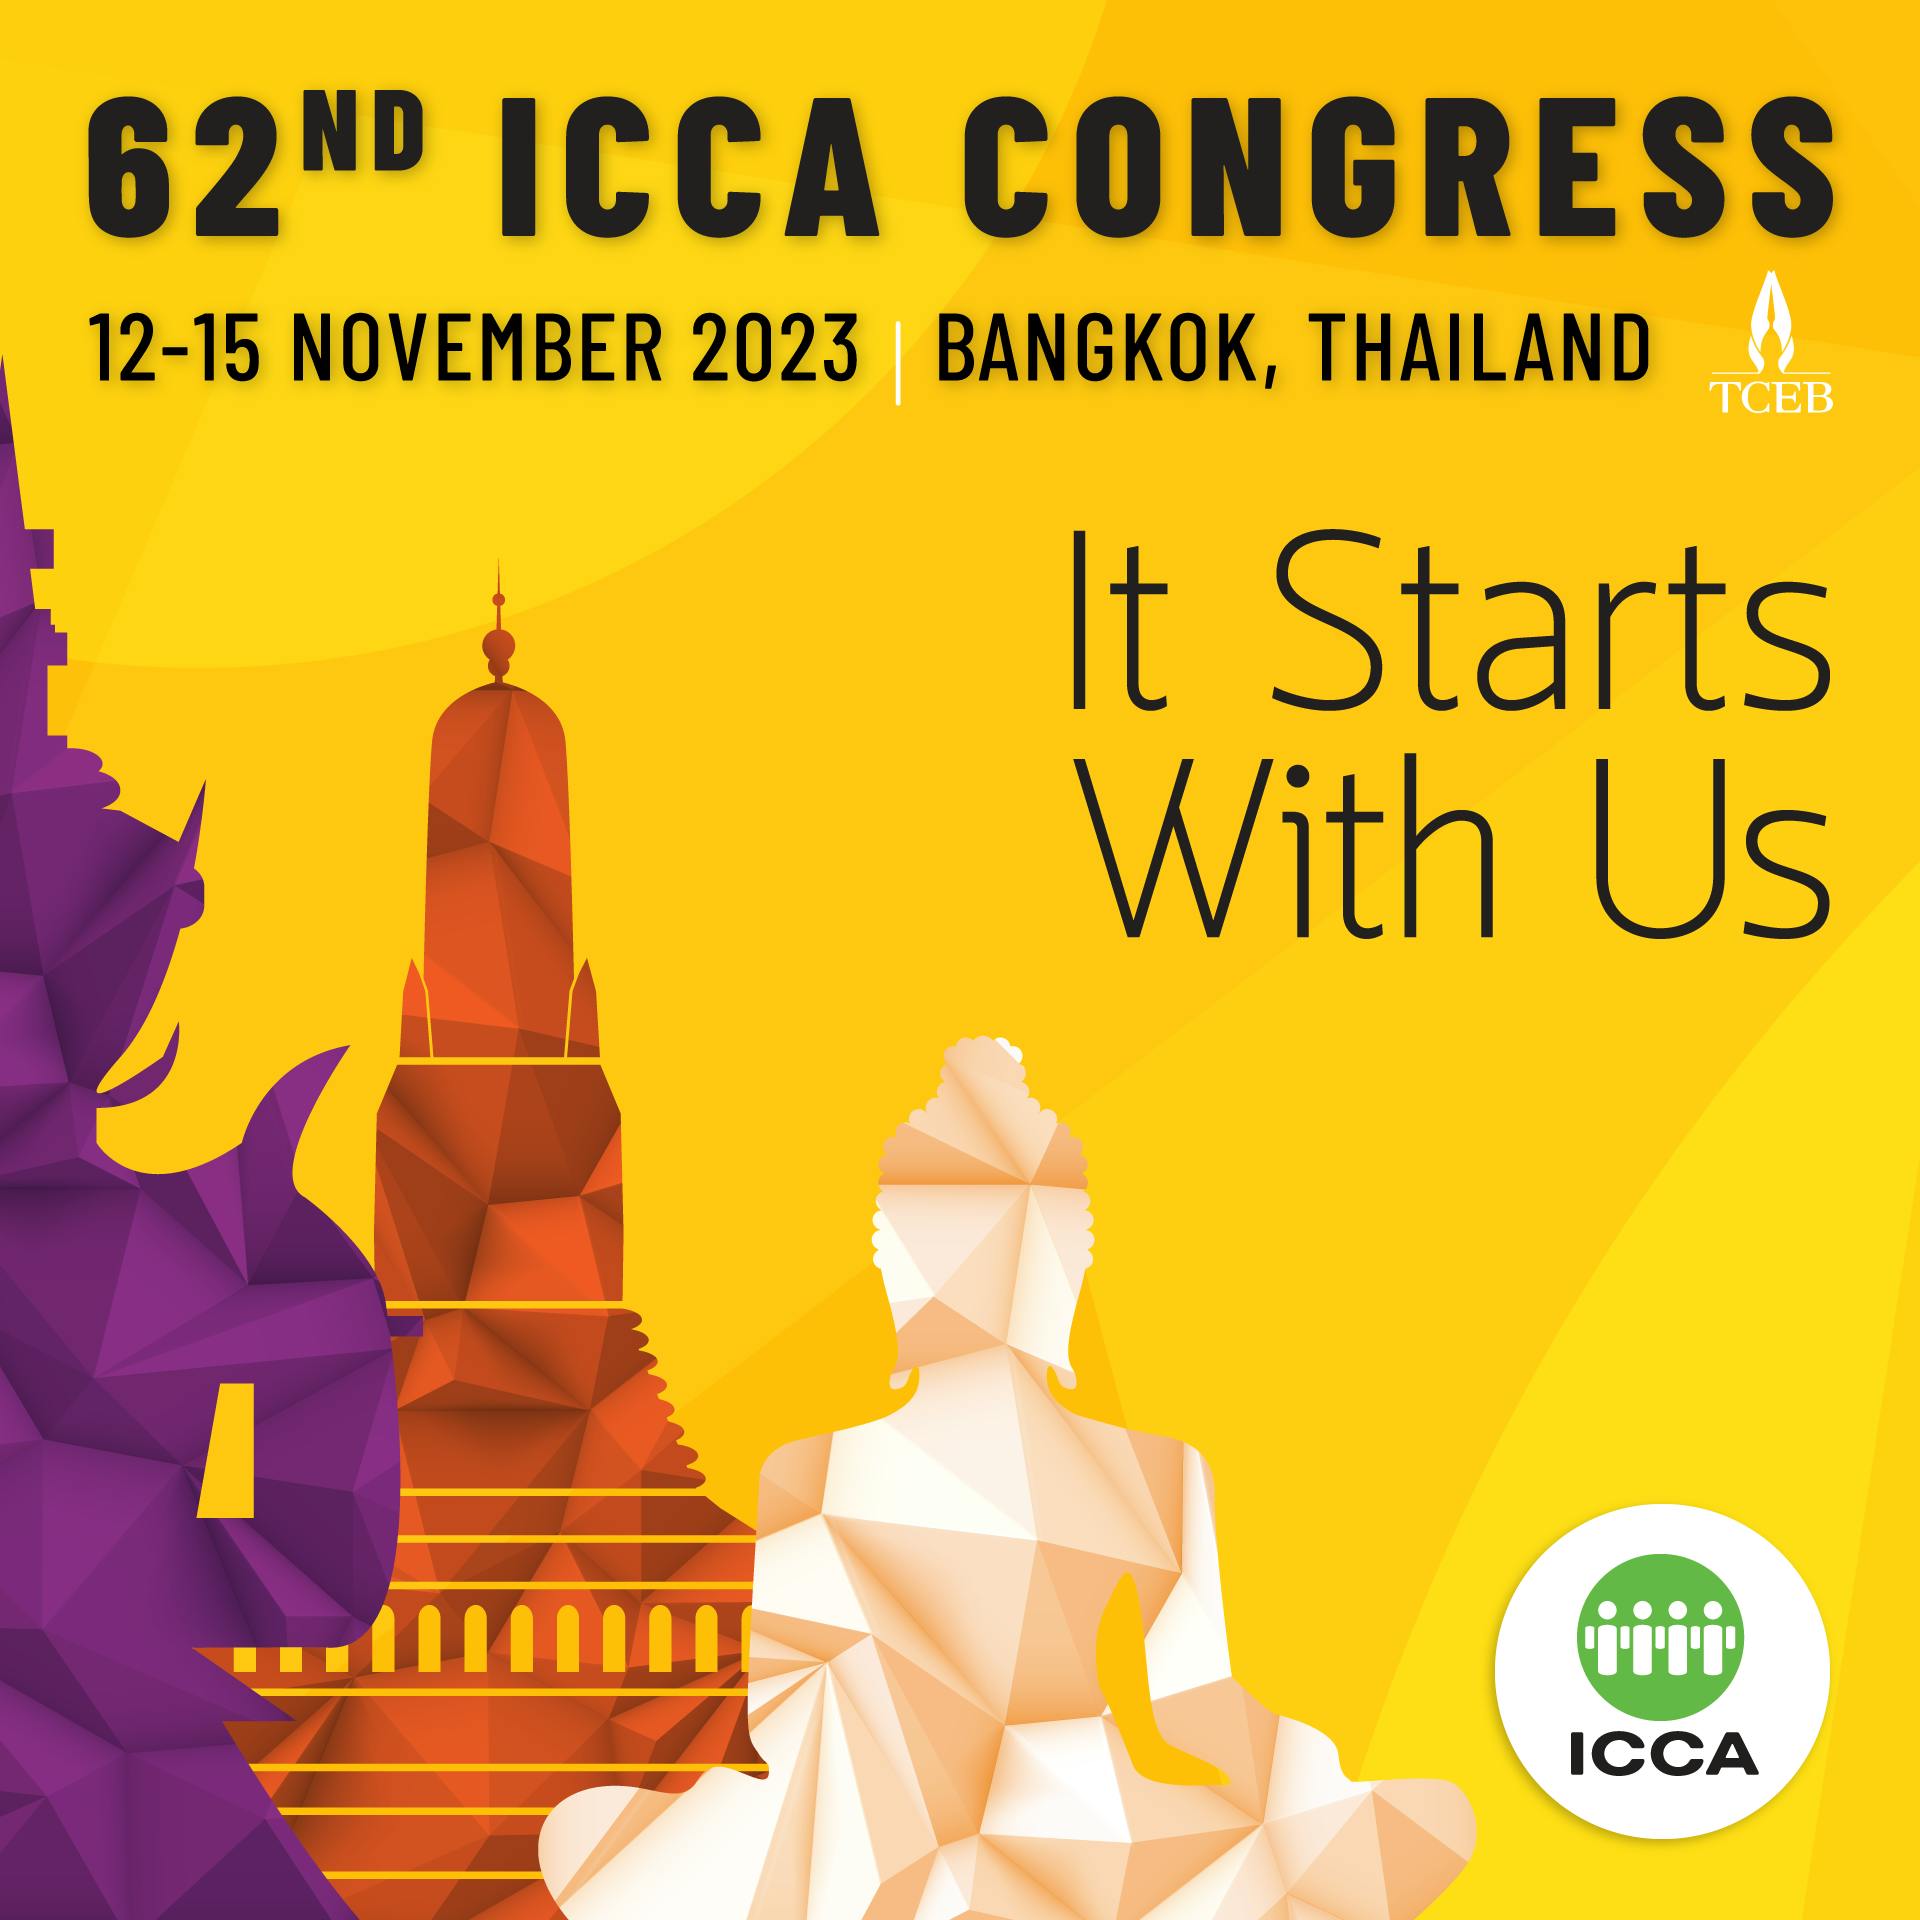 The 62nd ICCA Congress 2023